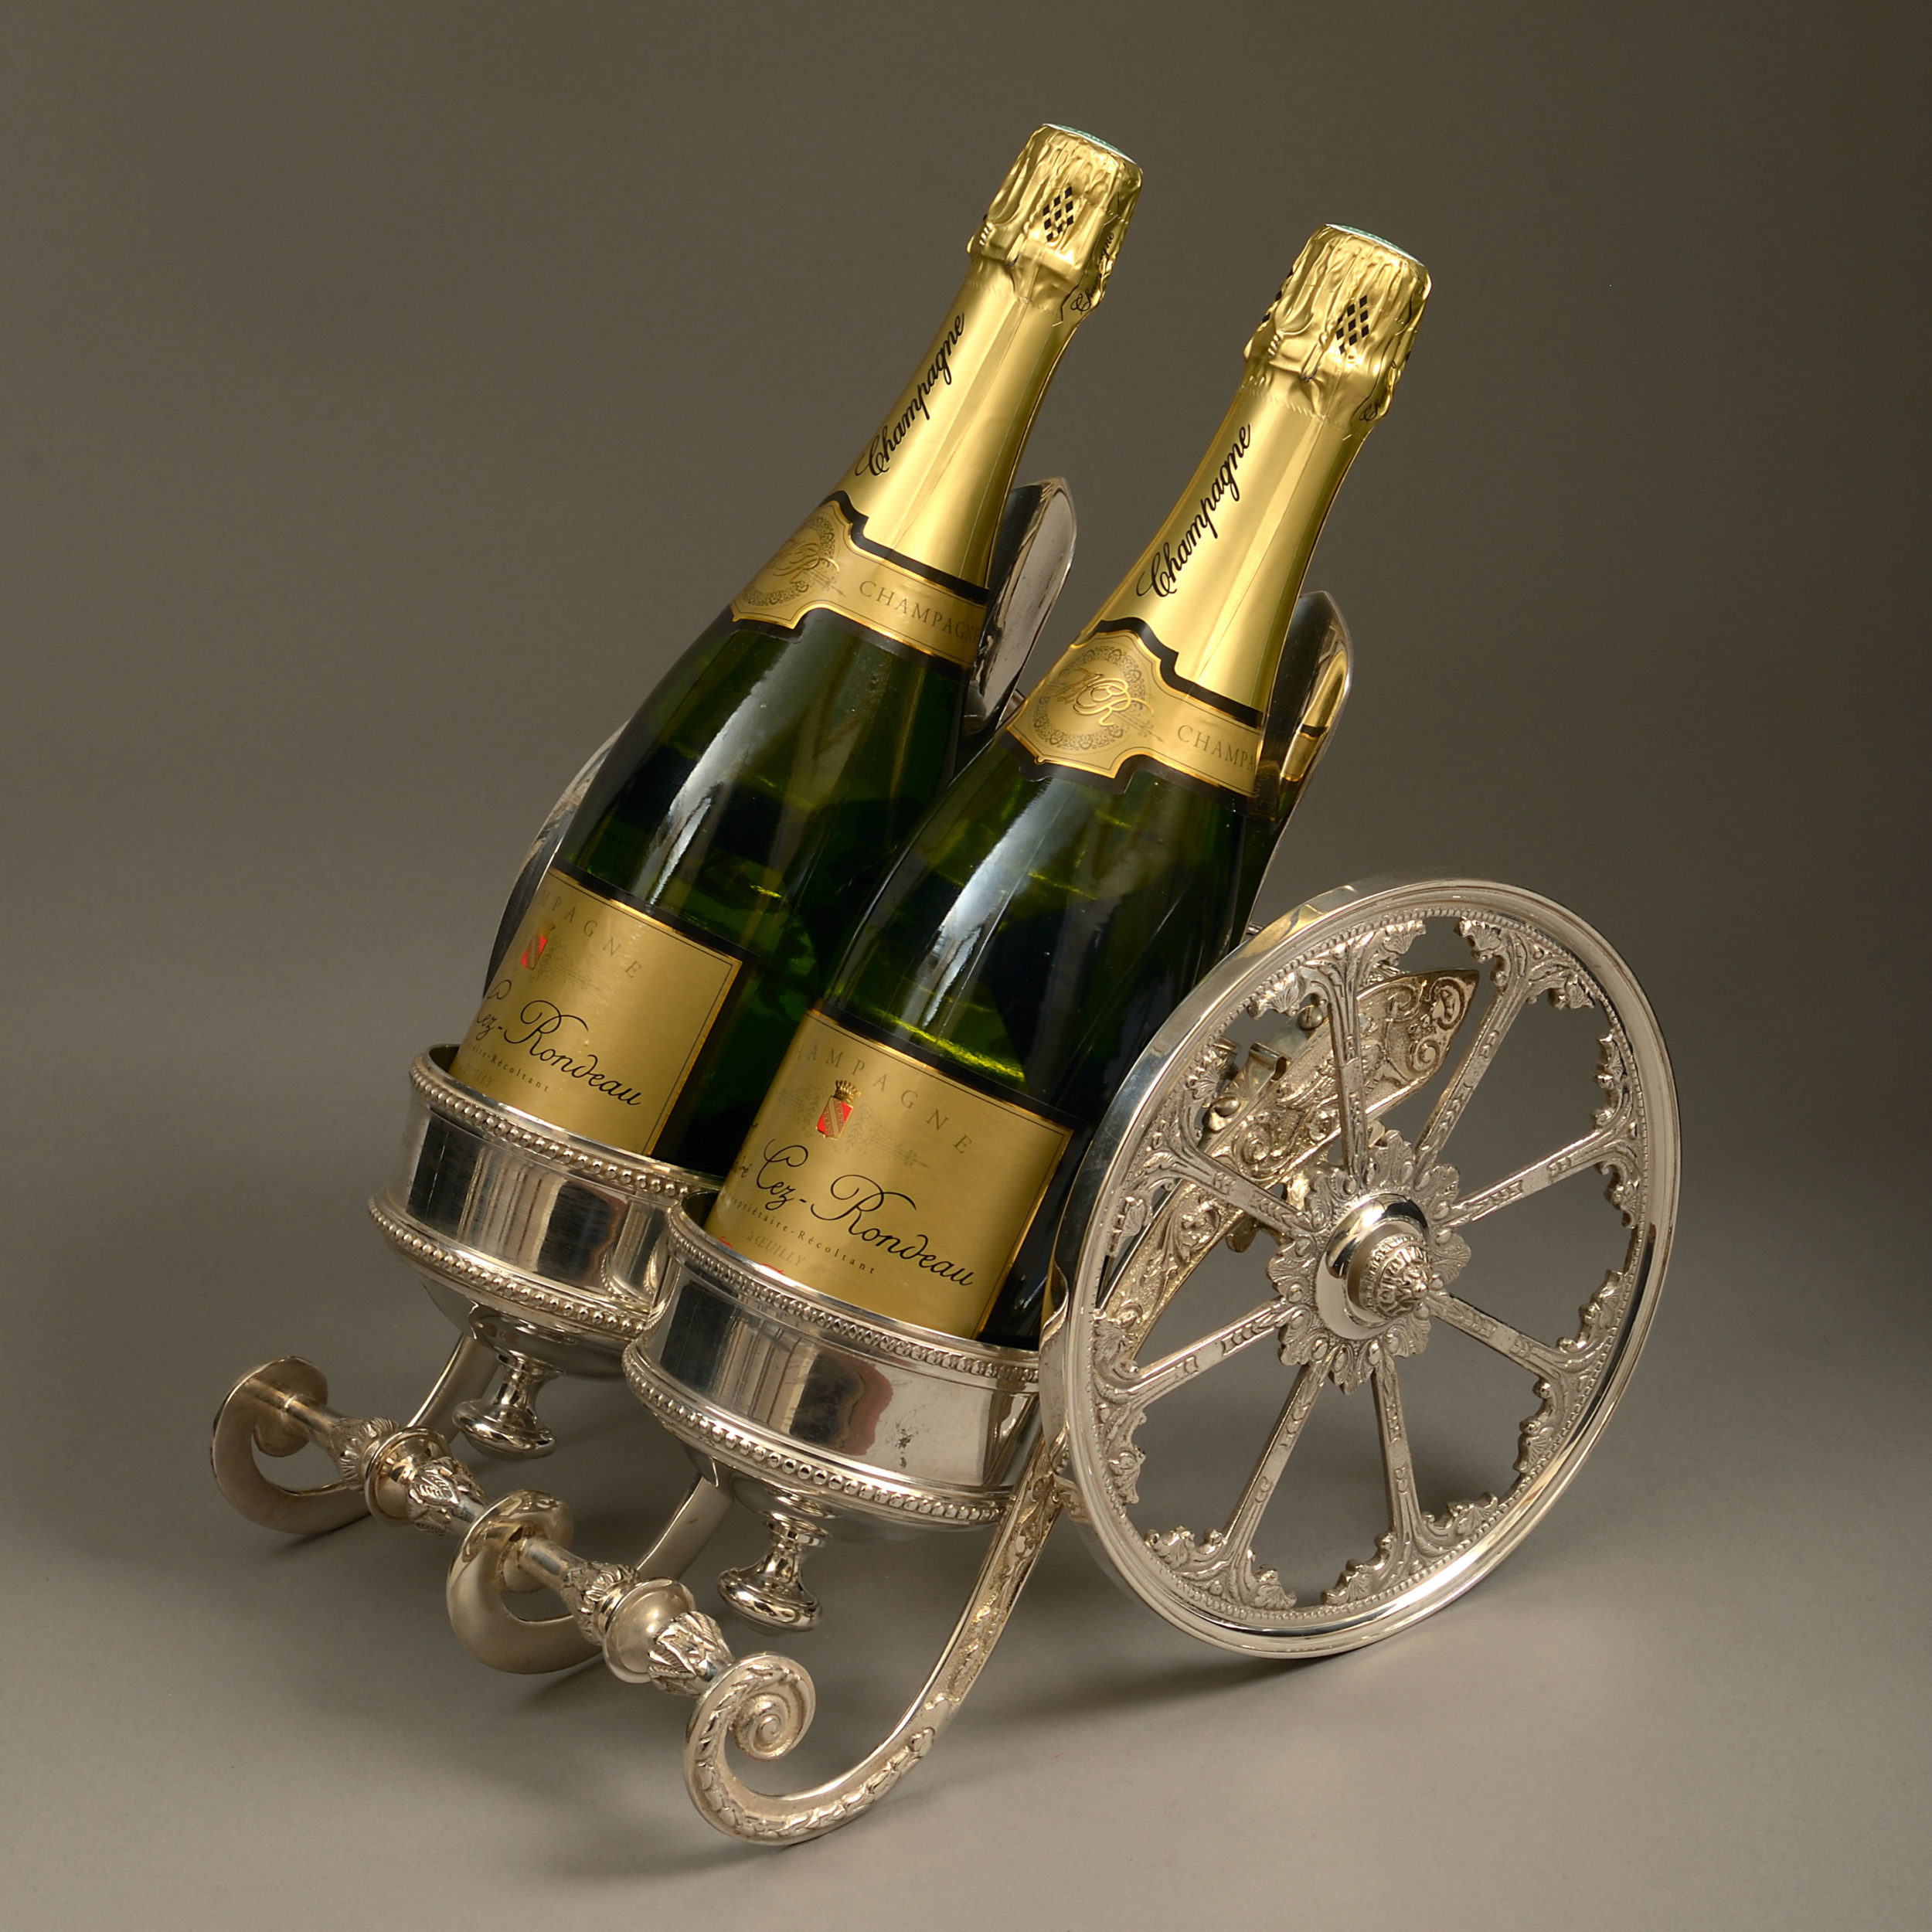 A Mid-20th Century Silvered Champagne Bottle Carriage | Timothy Langston  Fine Art & Antiques